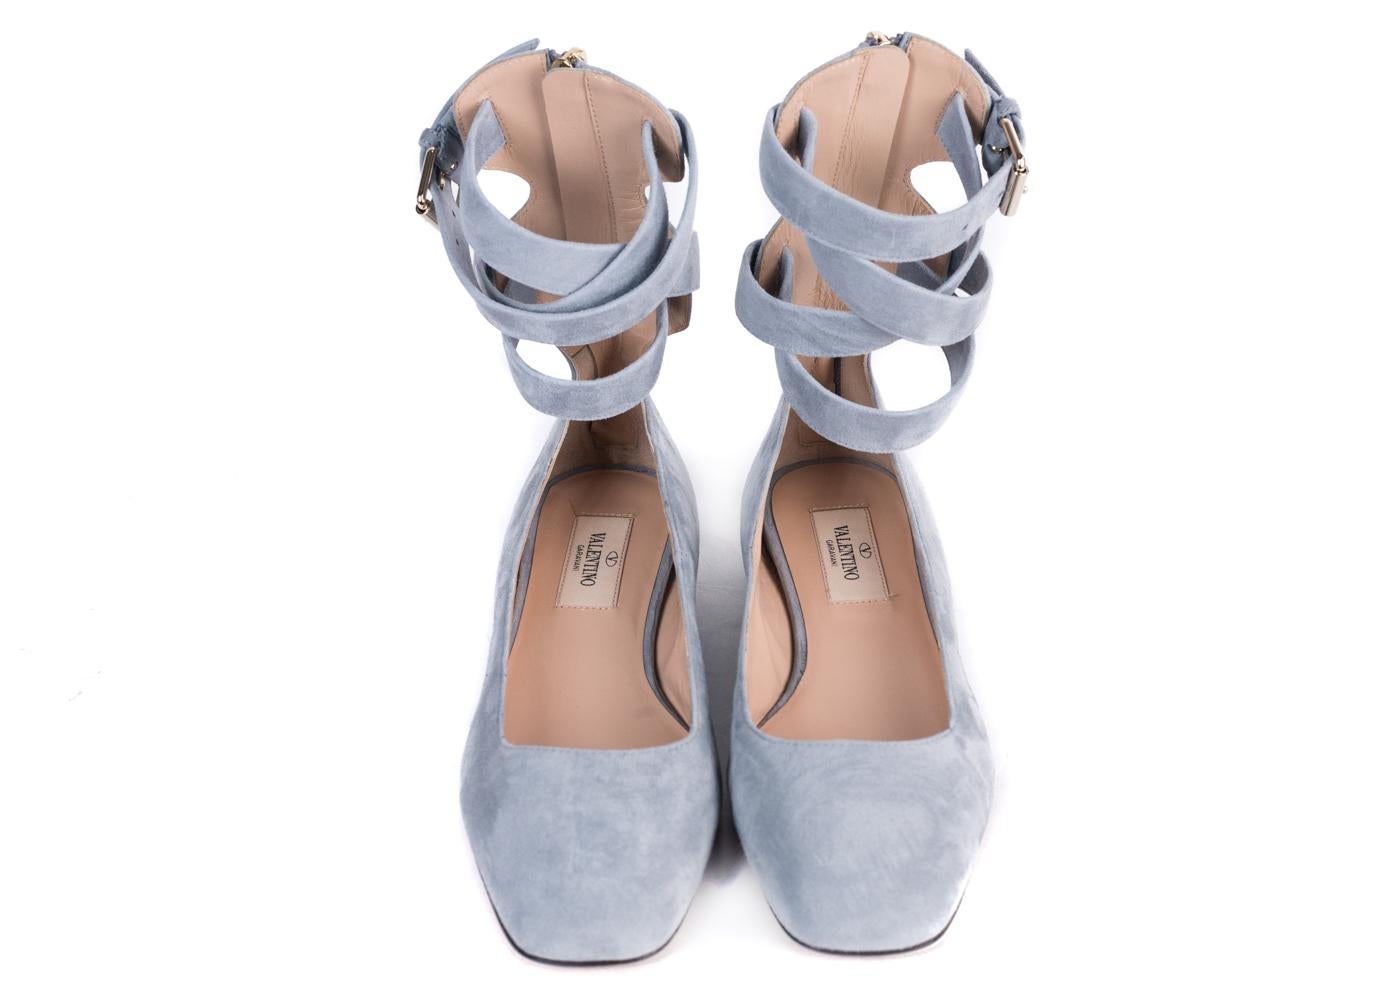 Valentino powder blue gray suede ballerina flats. These flats feature a ballerina silhouette with ankle straps in a buckle fastening. Chic and petite for a delicate look this summer season.



Suede
Ballerina Flat Silhouette
Strappy Ankle with